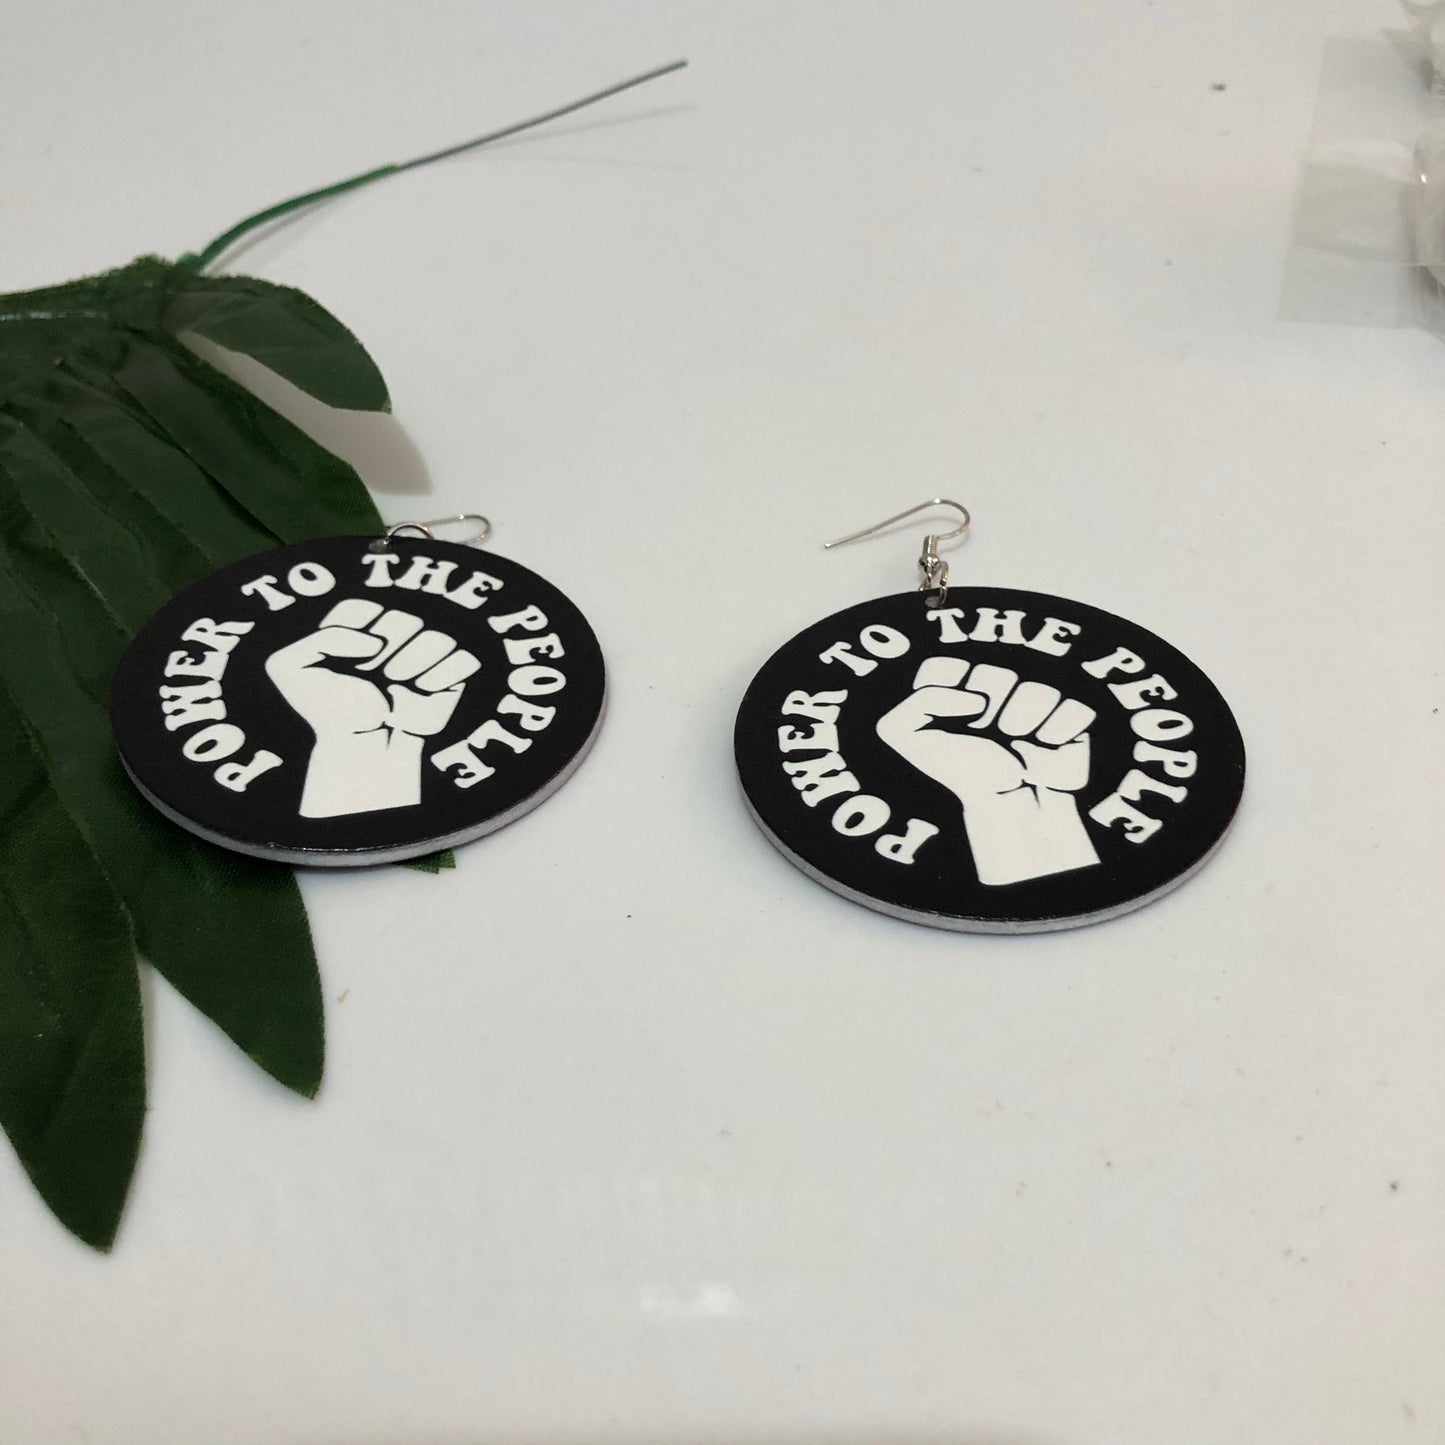 No justice no peace - wooden earrings